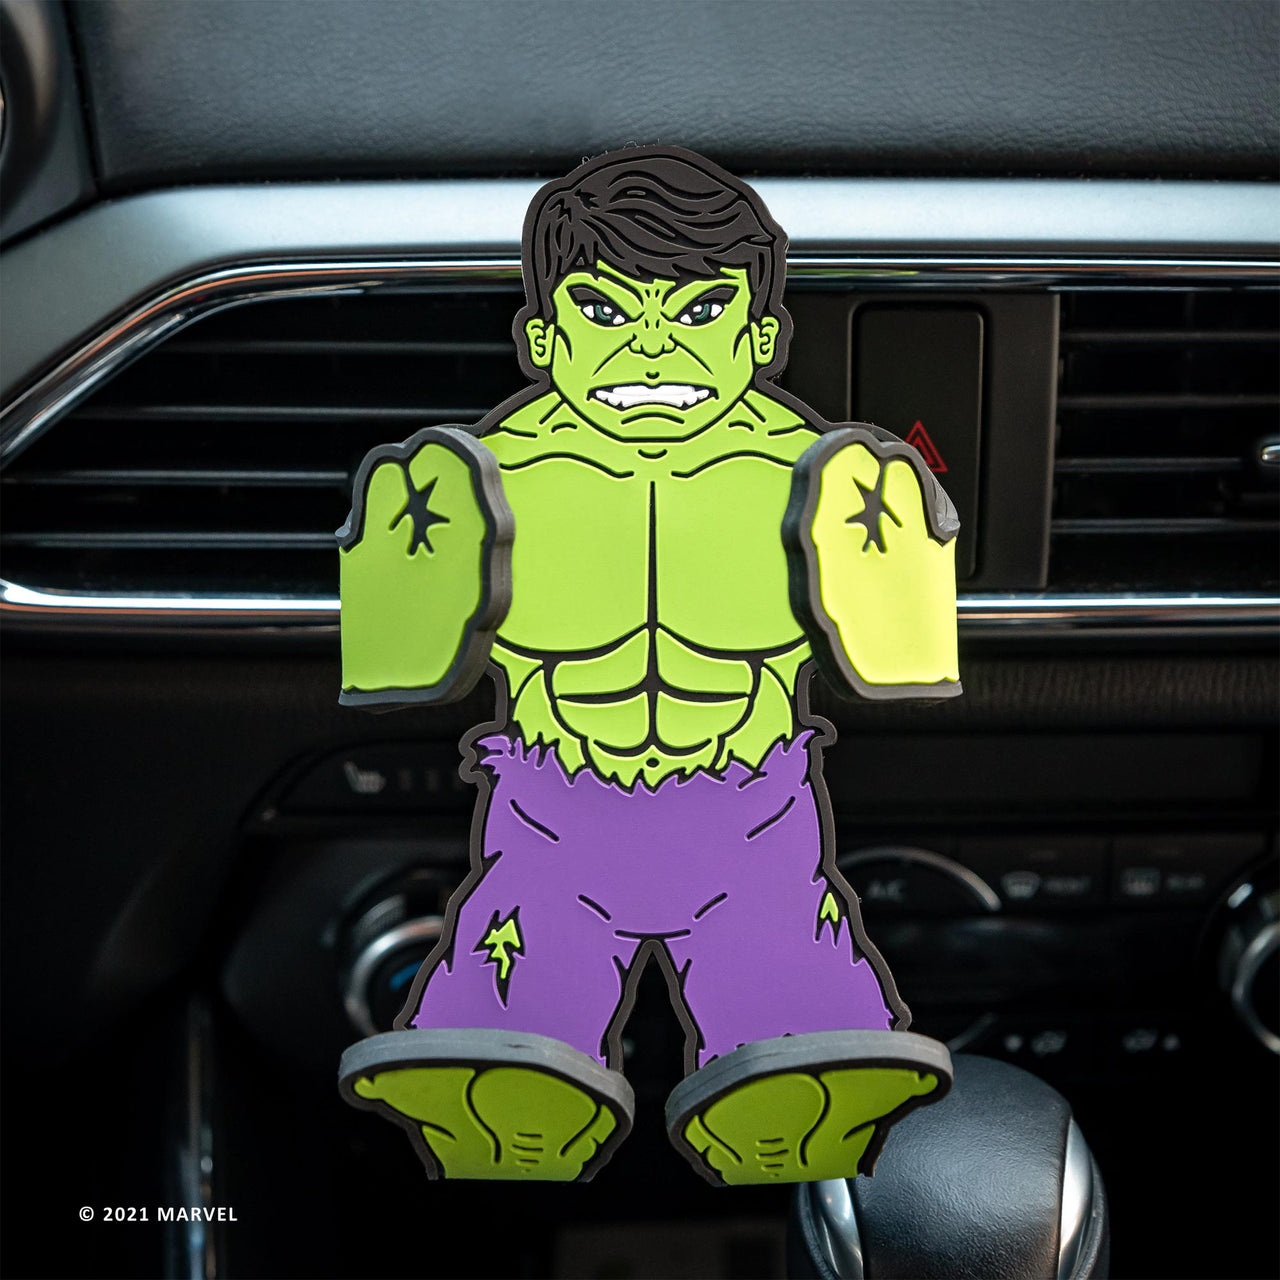 Image of Marvel Comics Hulk Hug Buddy attached to a car air vent with arms and legs in the closed position ready to hold a phone or smart device on your next journey